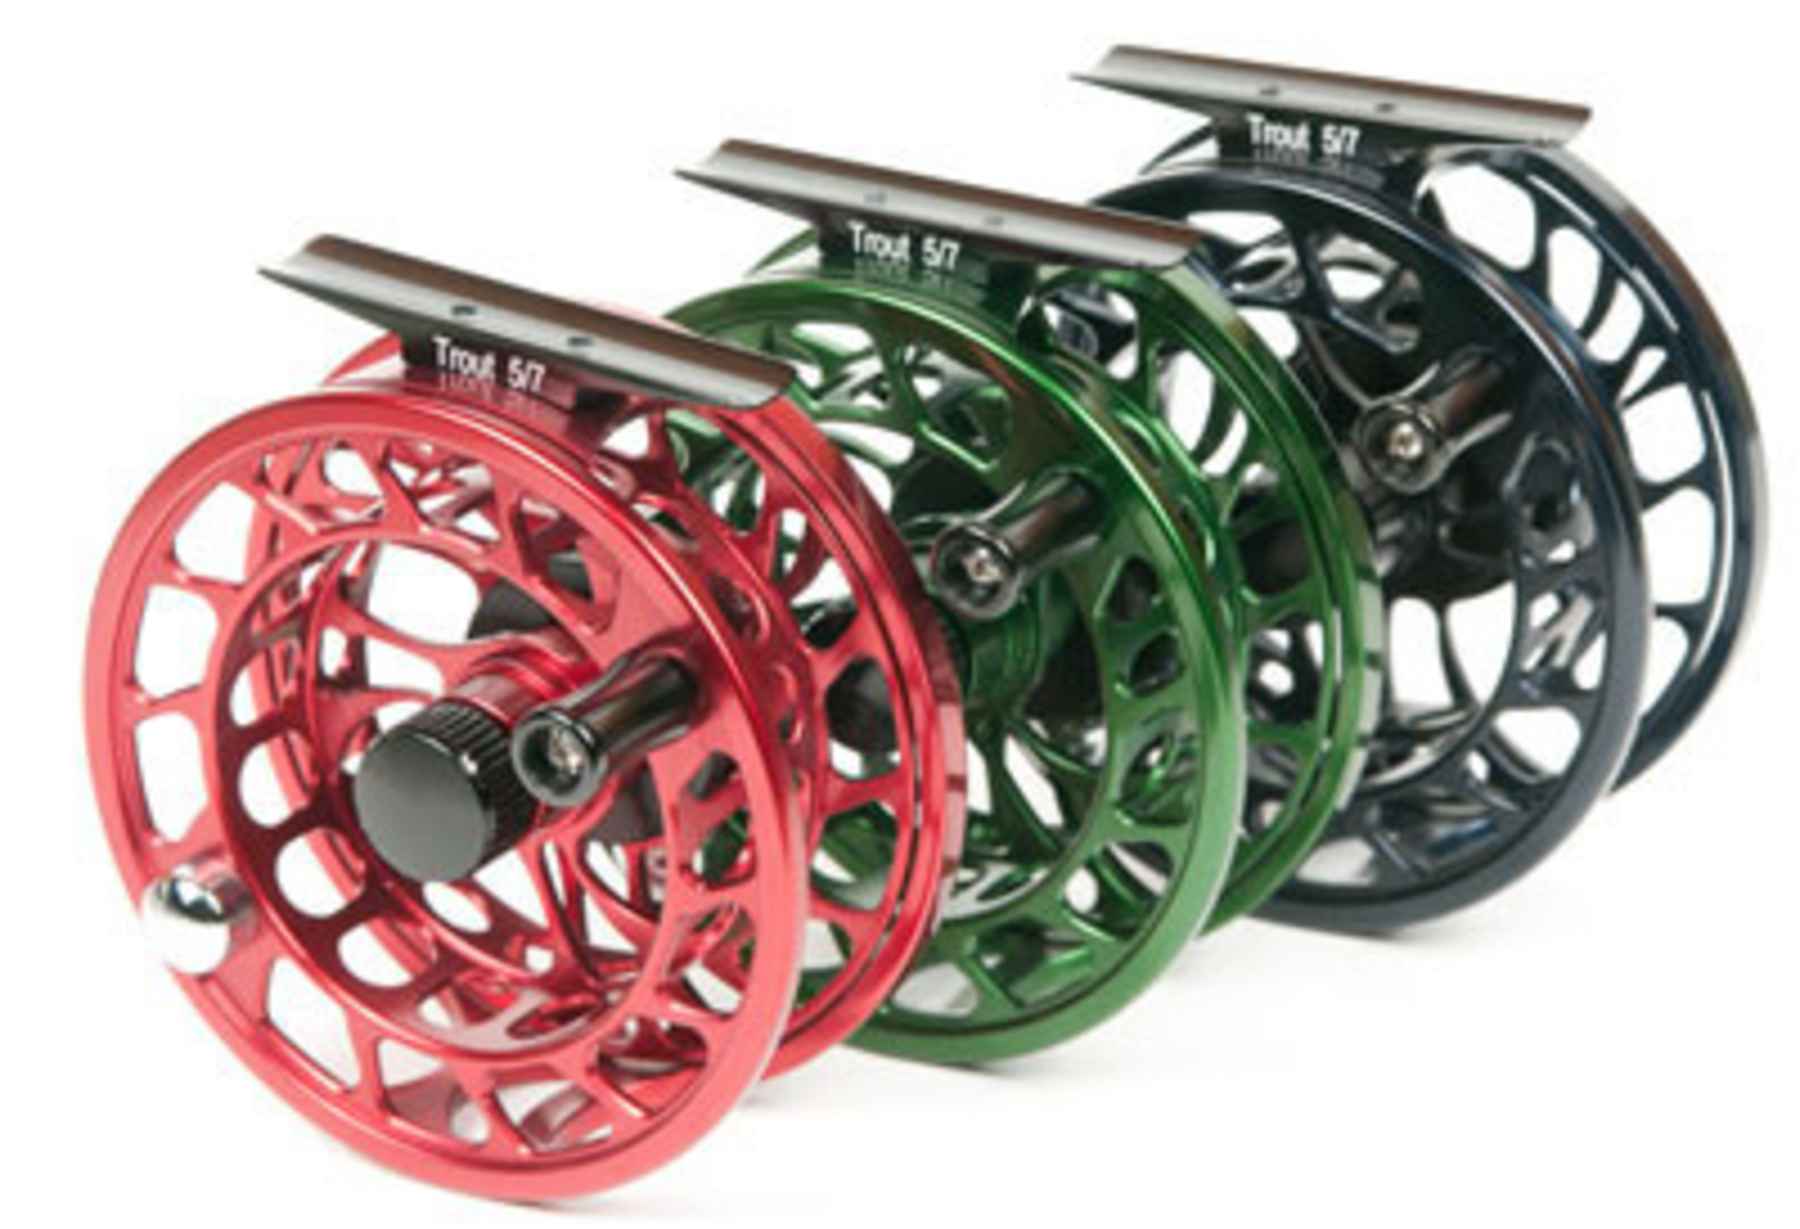 Colored Allen Trout Reels Are Back